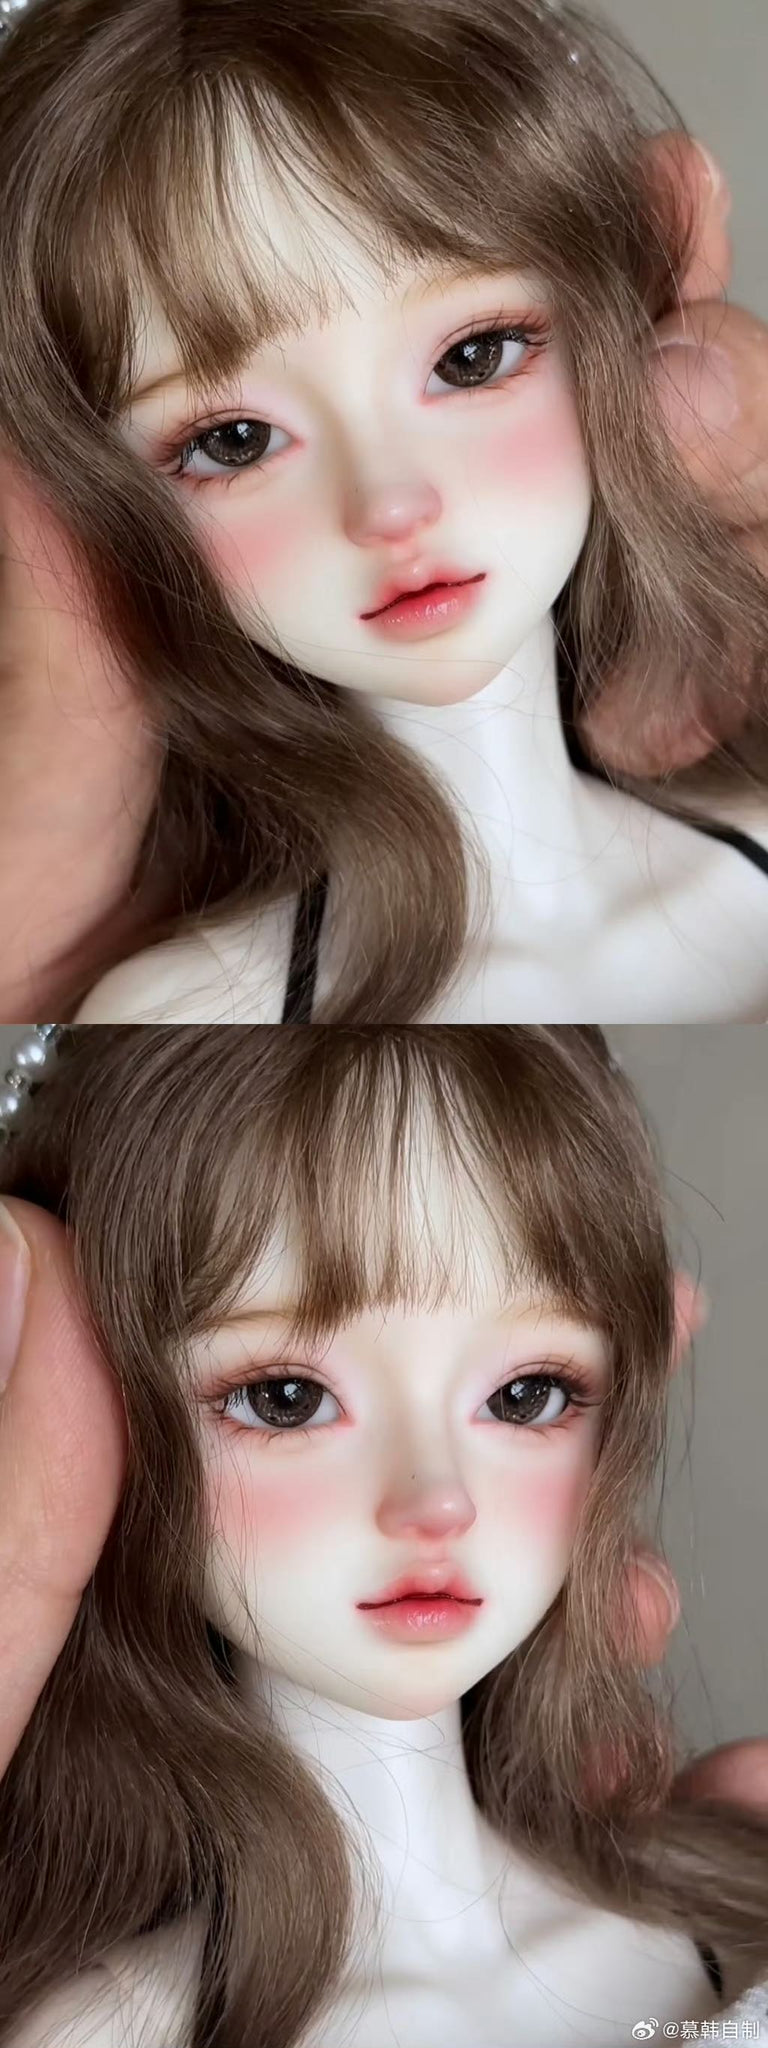 [SOLD OUT] Muhan's Doll - Yuna w/ Face-up